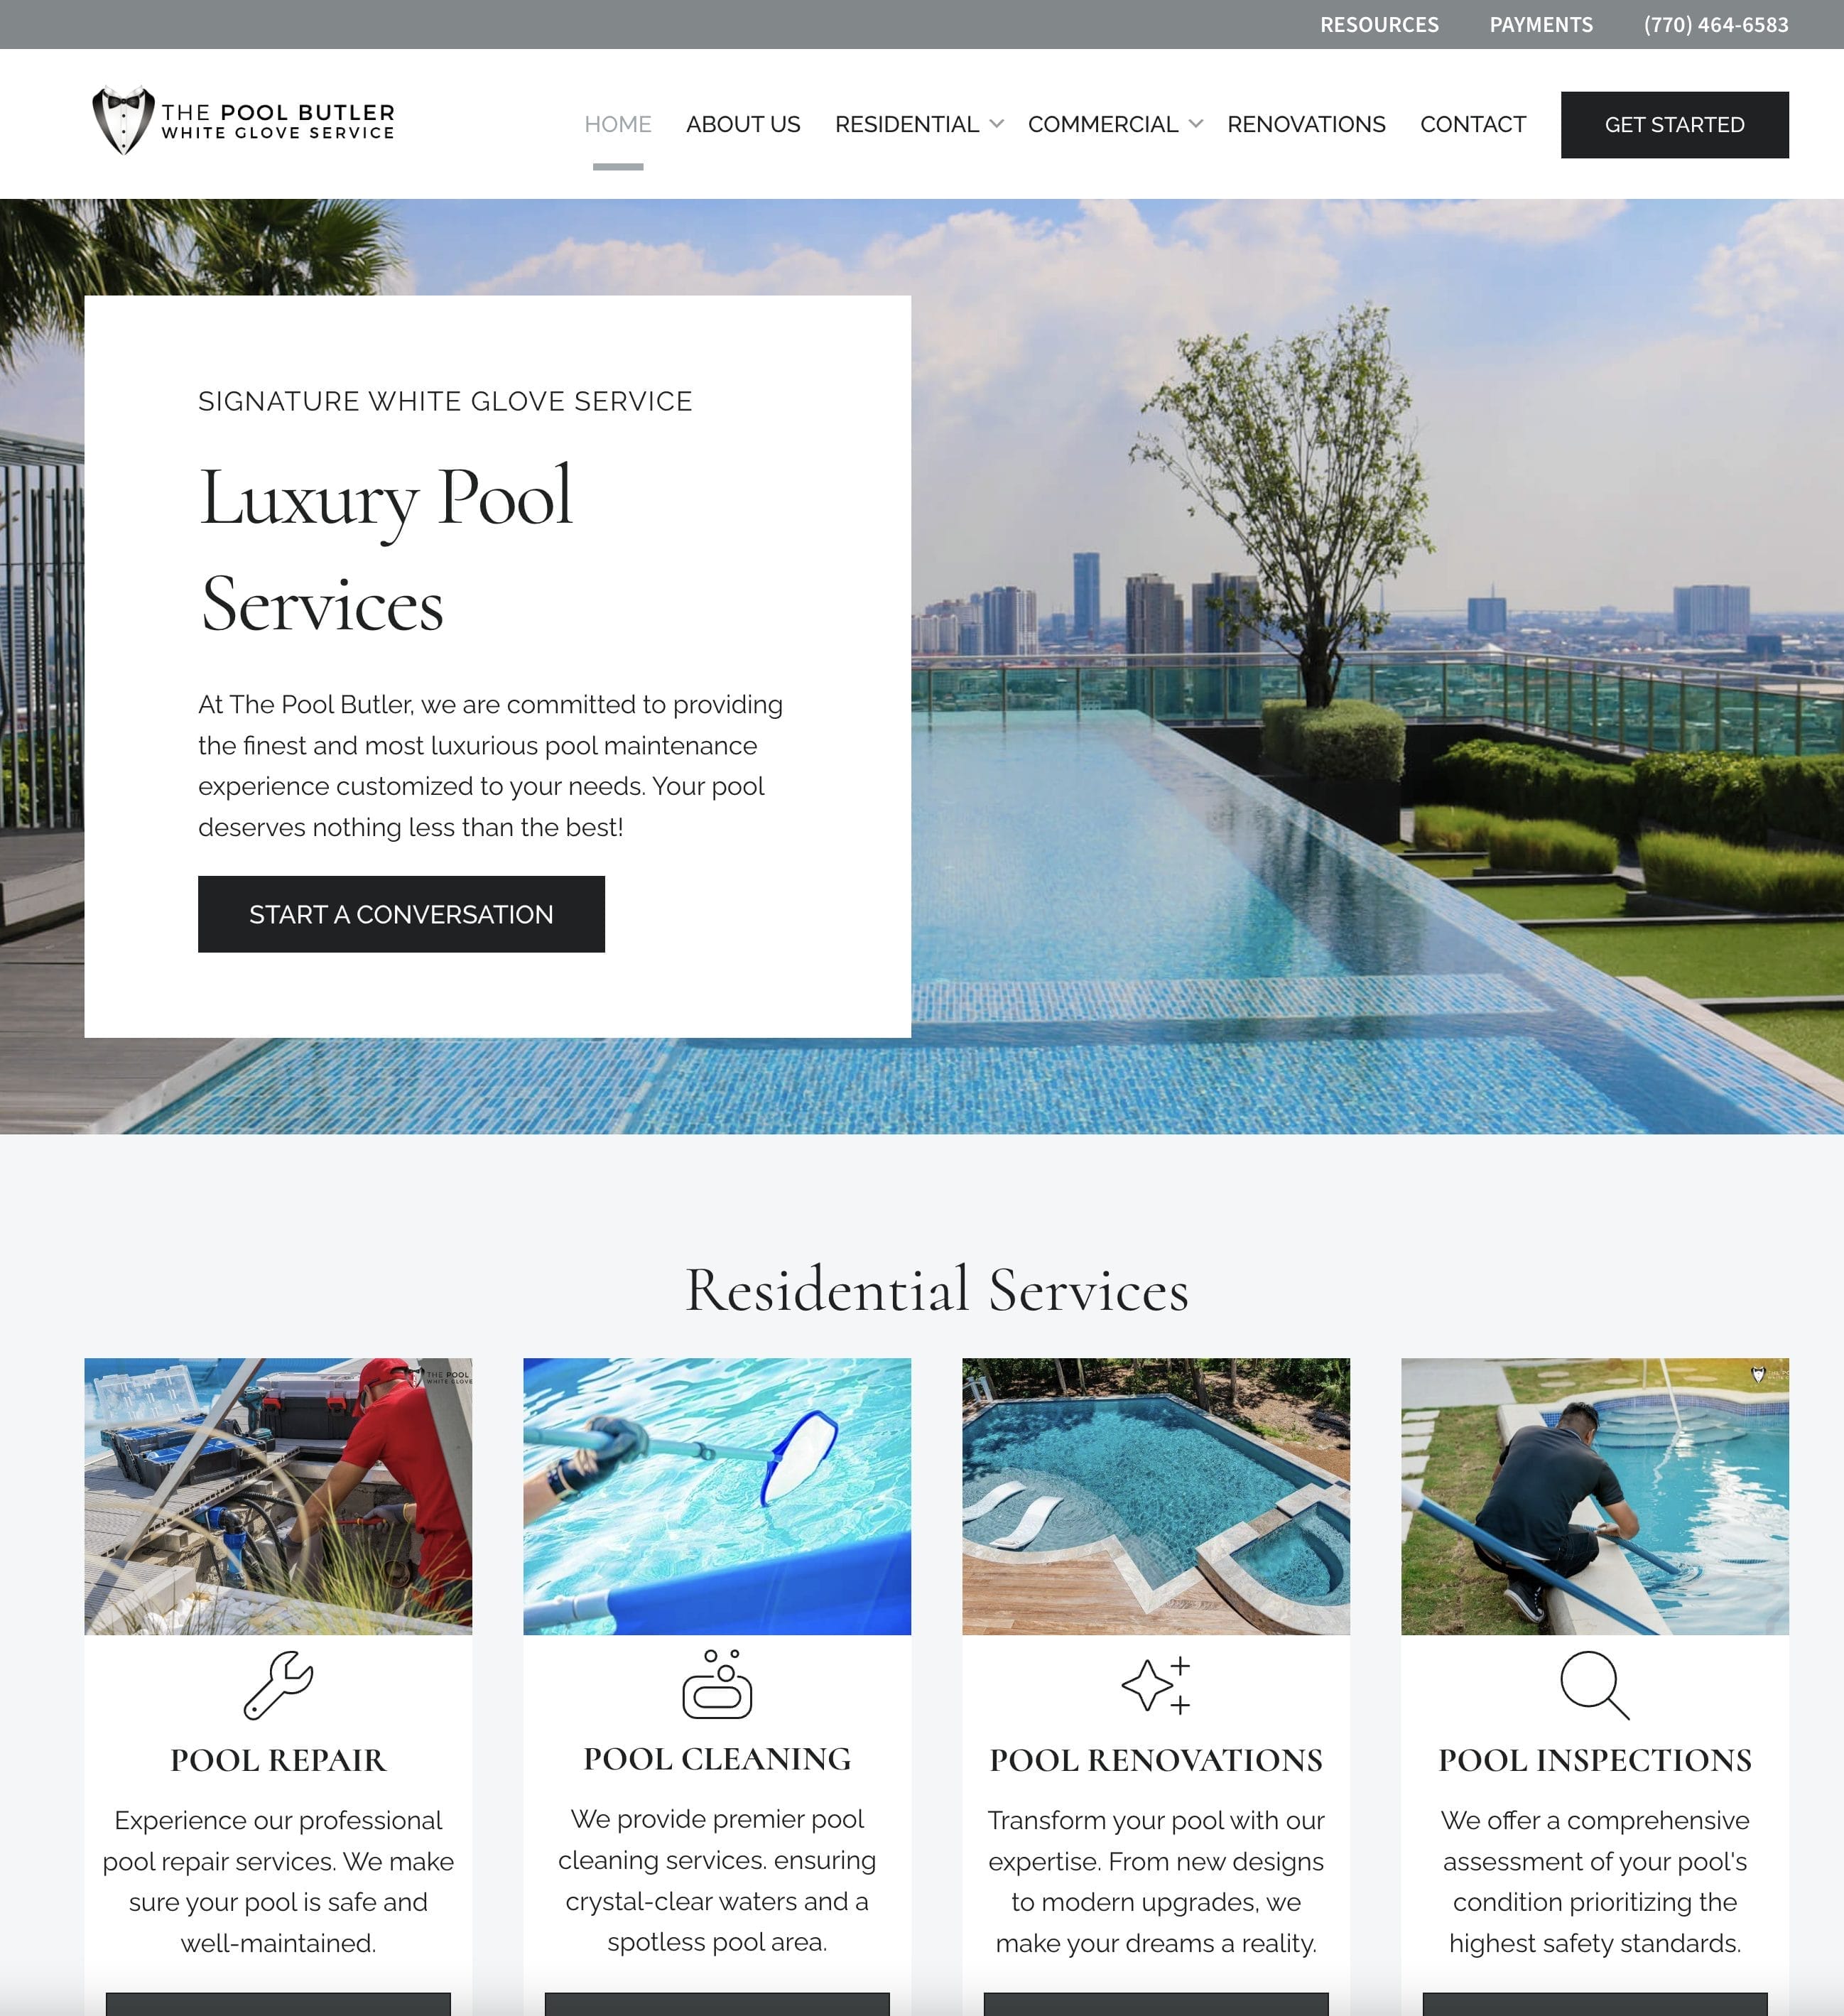 Pool website example from the new pool website we built